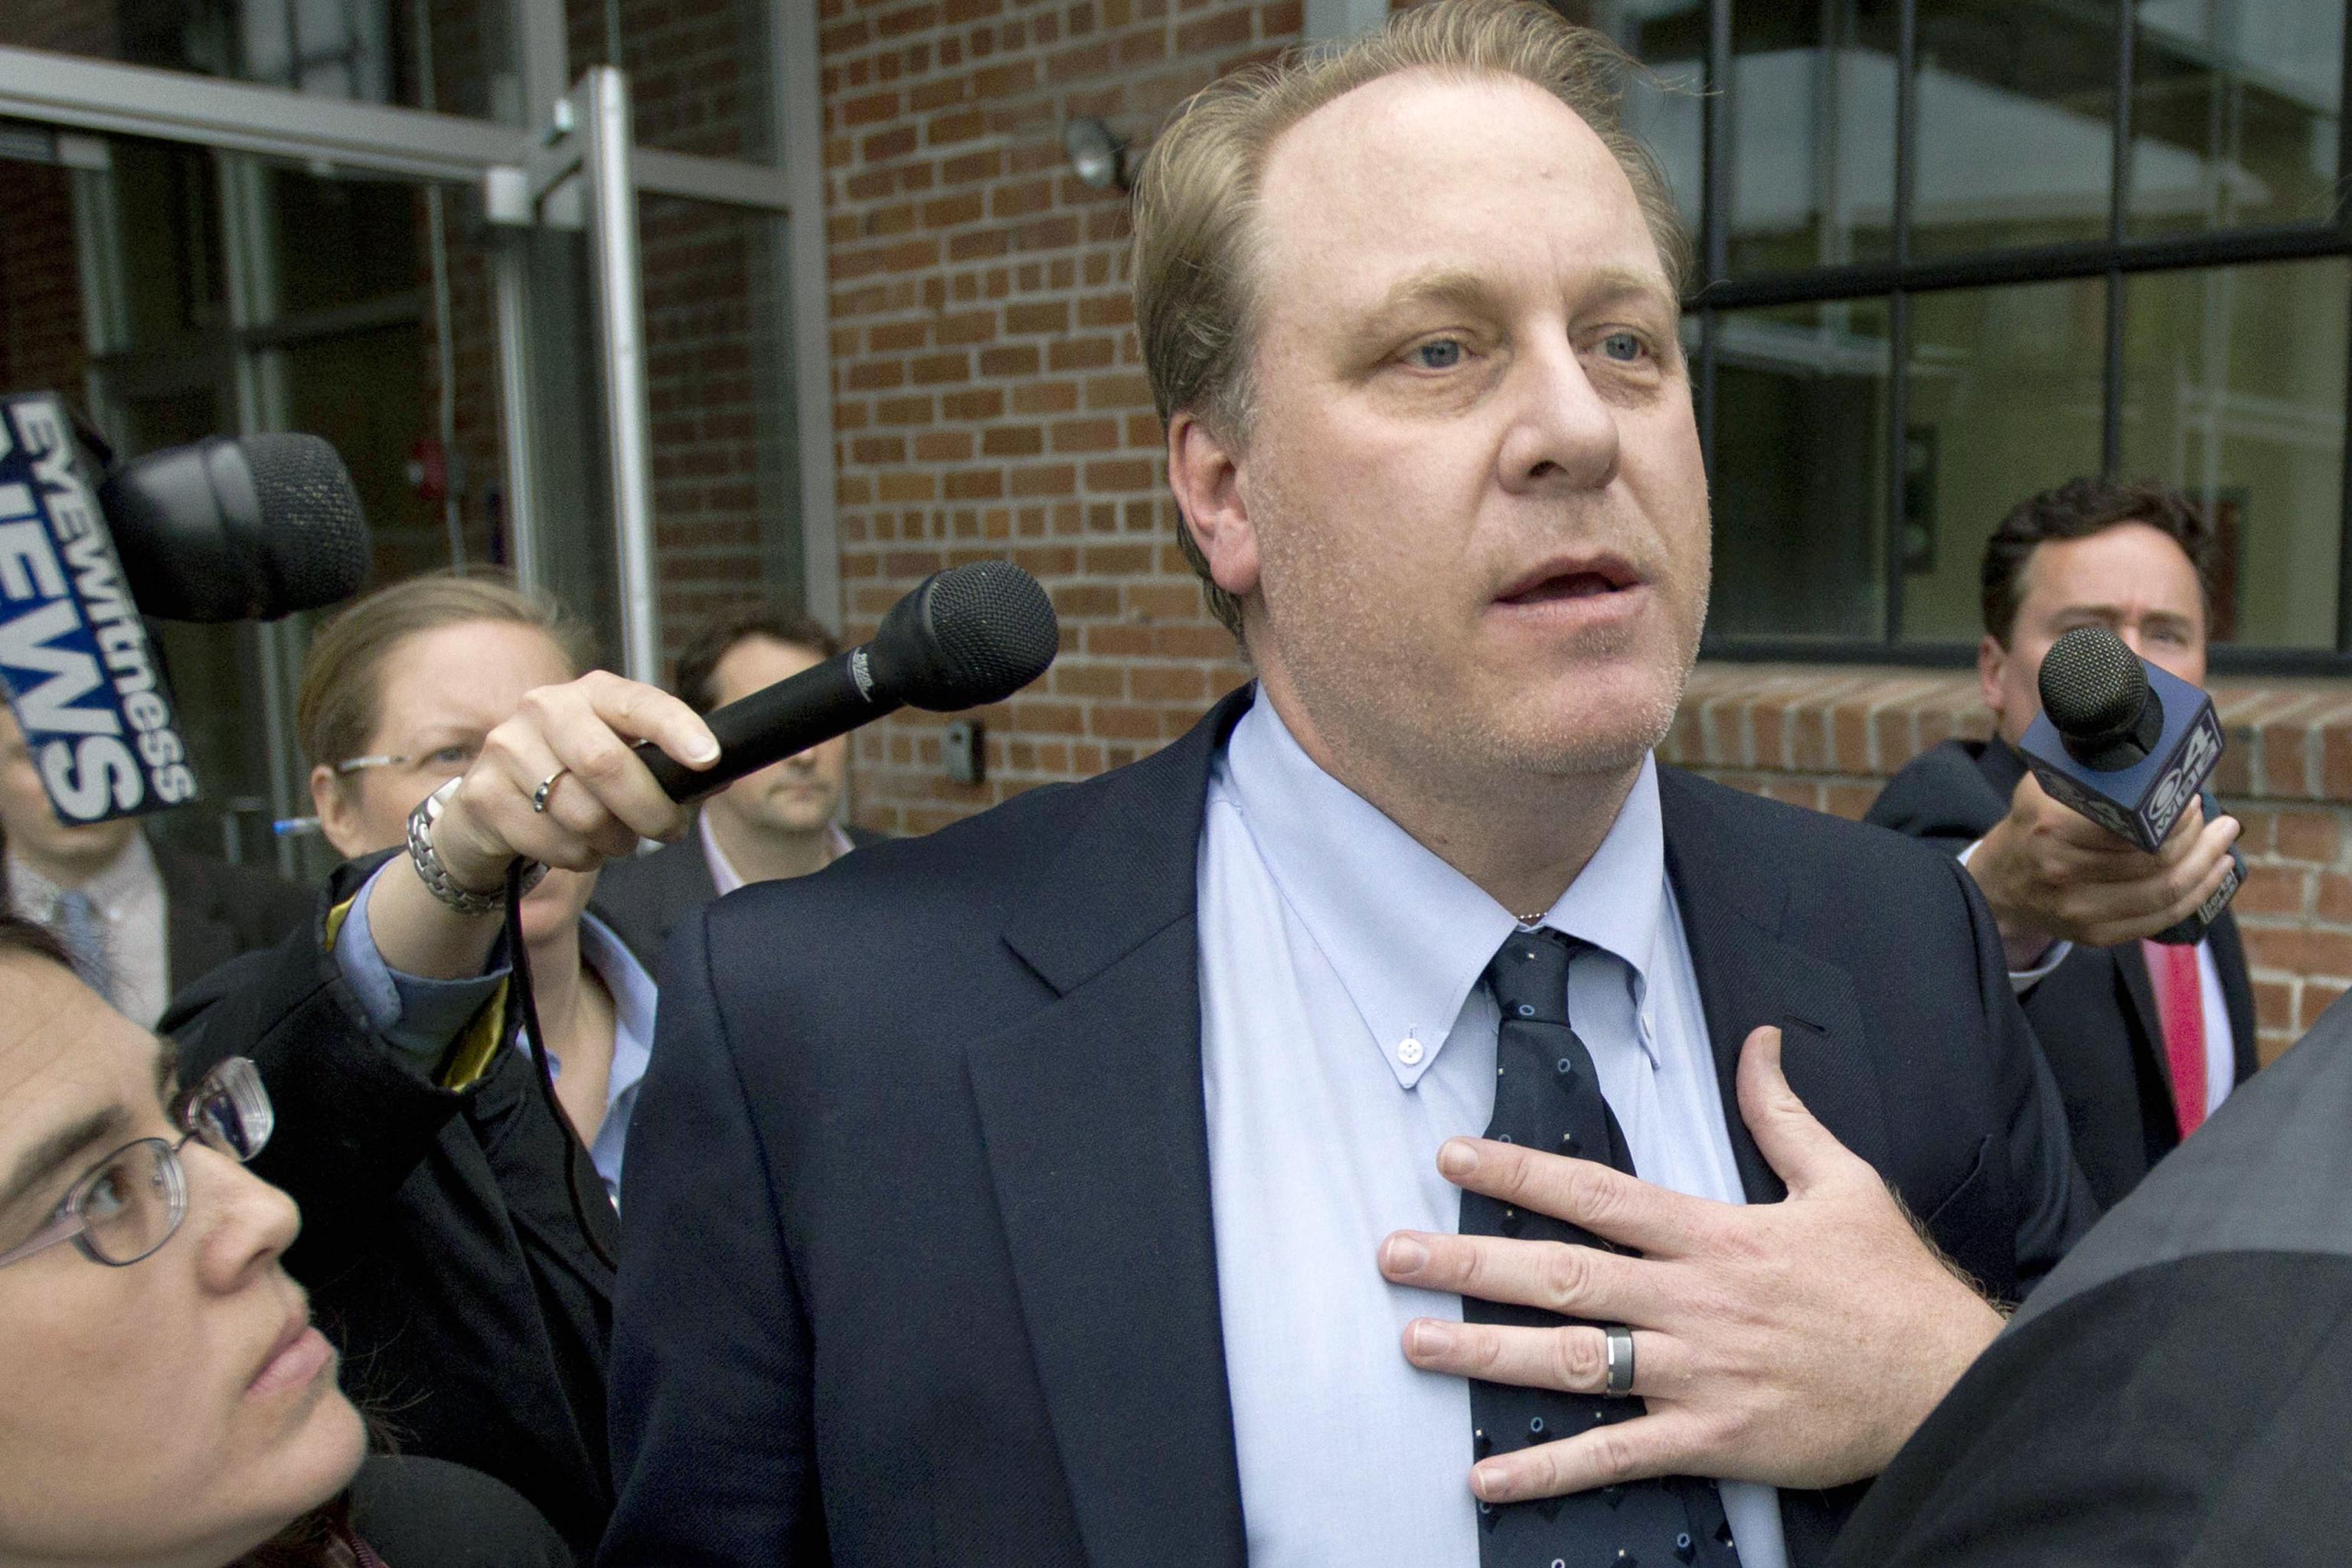 Fact Check: Are Curt Schilling's controversial comments on COVID vaccines  correct? Former pitcher reignites controversy, calling them 'untested